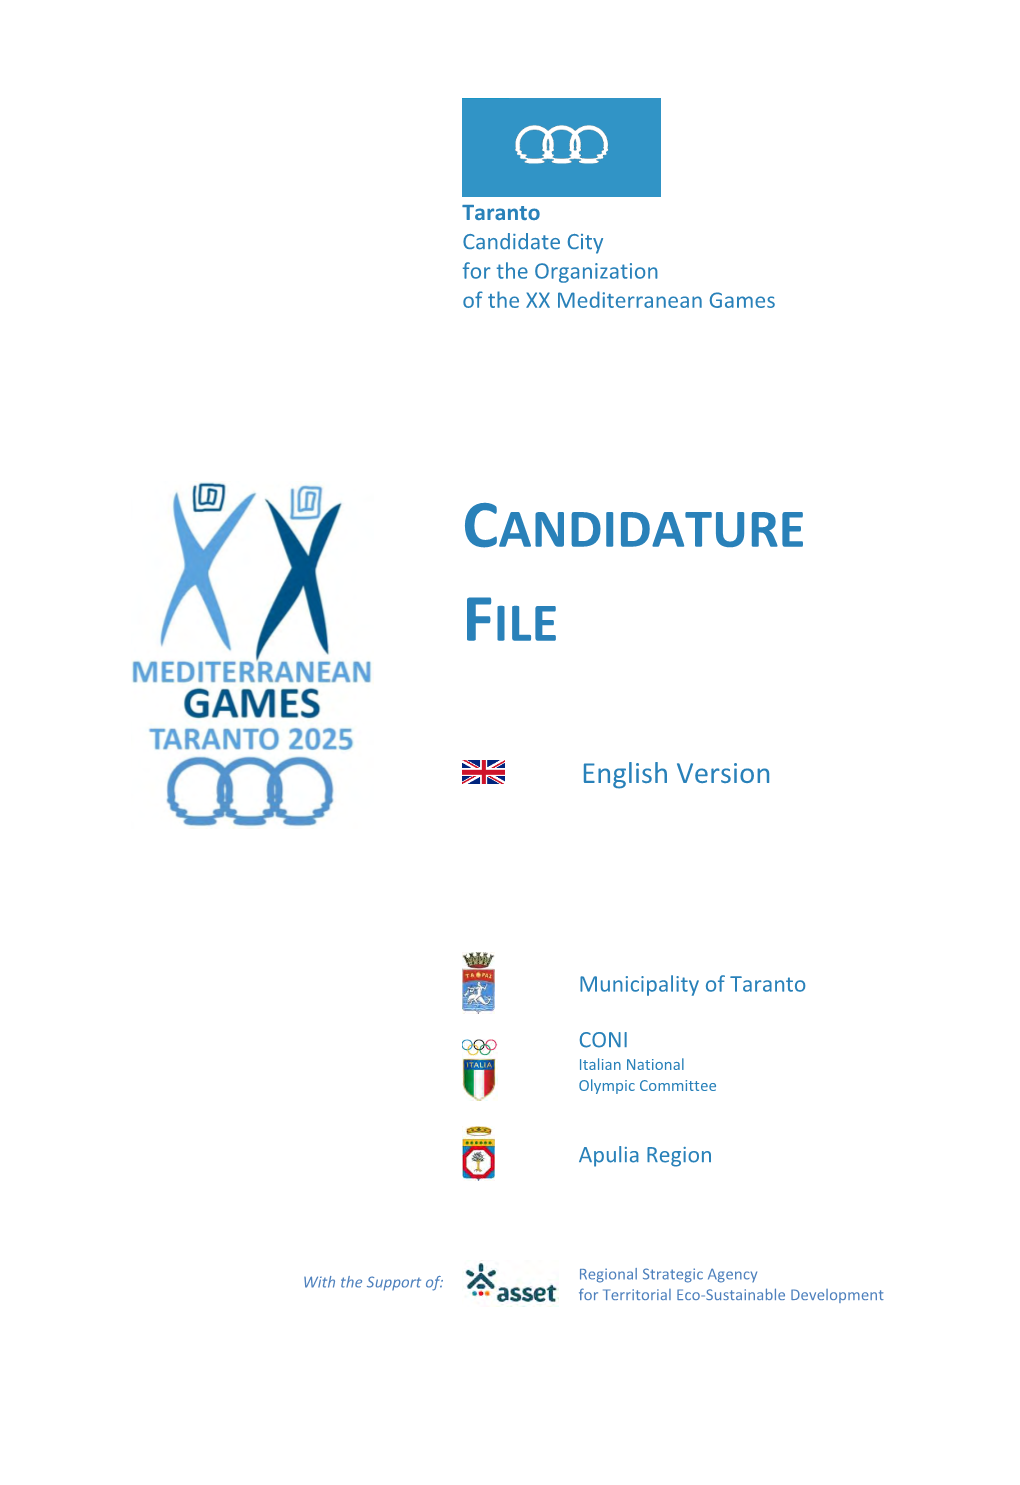 Candidature File